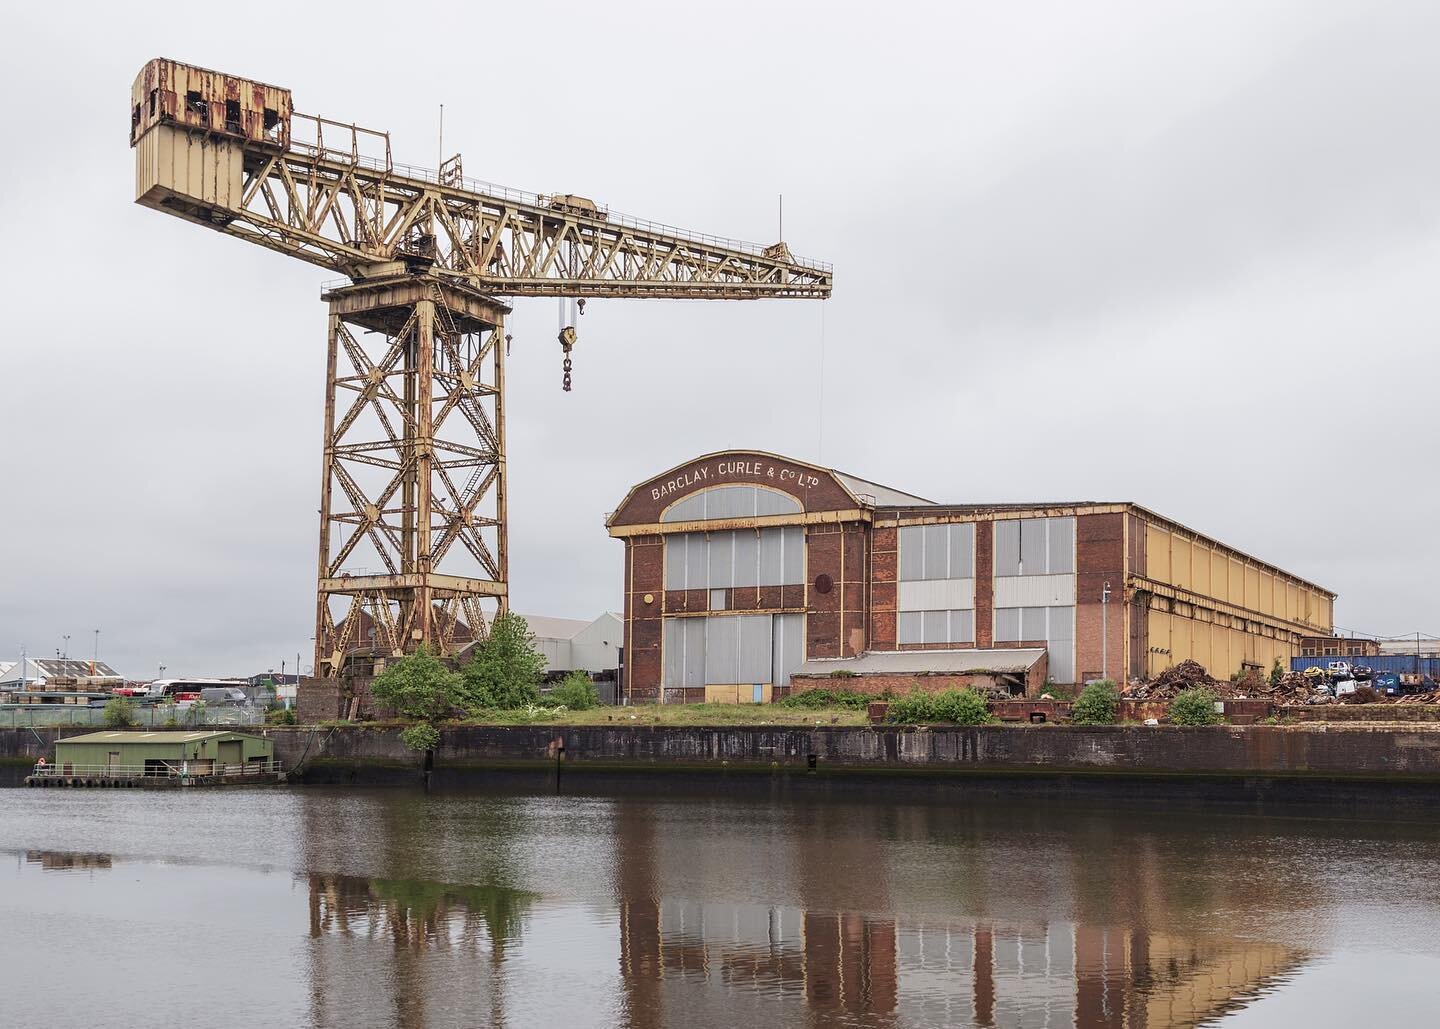 Disused category A listed Titan Crane at Barclay Curle's Clydeholm Yard, Glasgow, Scotland (2023)

It is one of the last four remaining titan or giant cantilever cranes in and around Glasgow City and this one in Whiteinch on the north bank of the riv